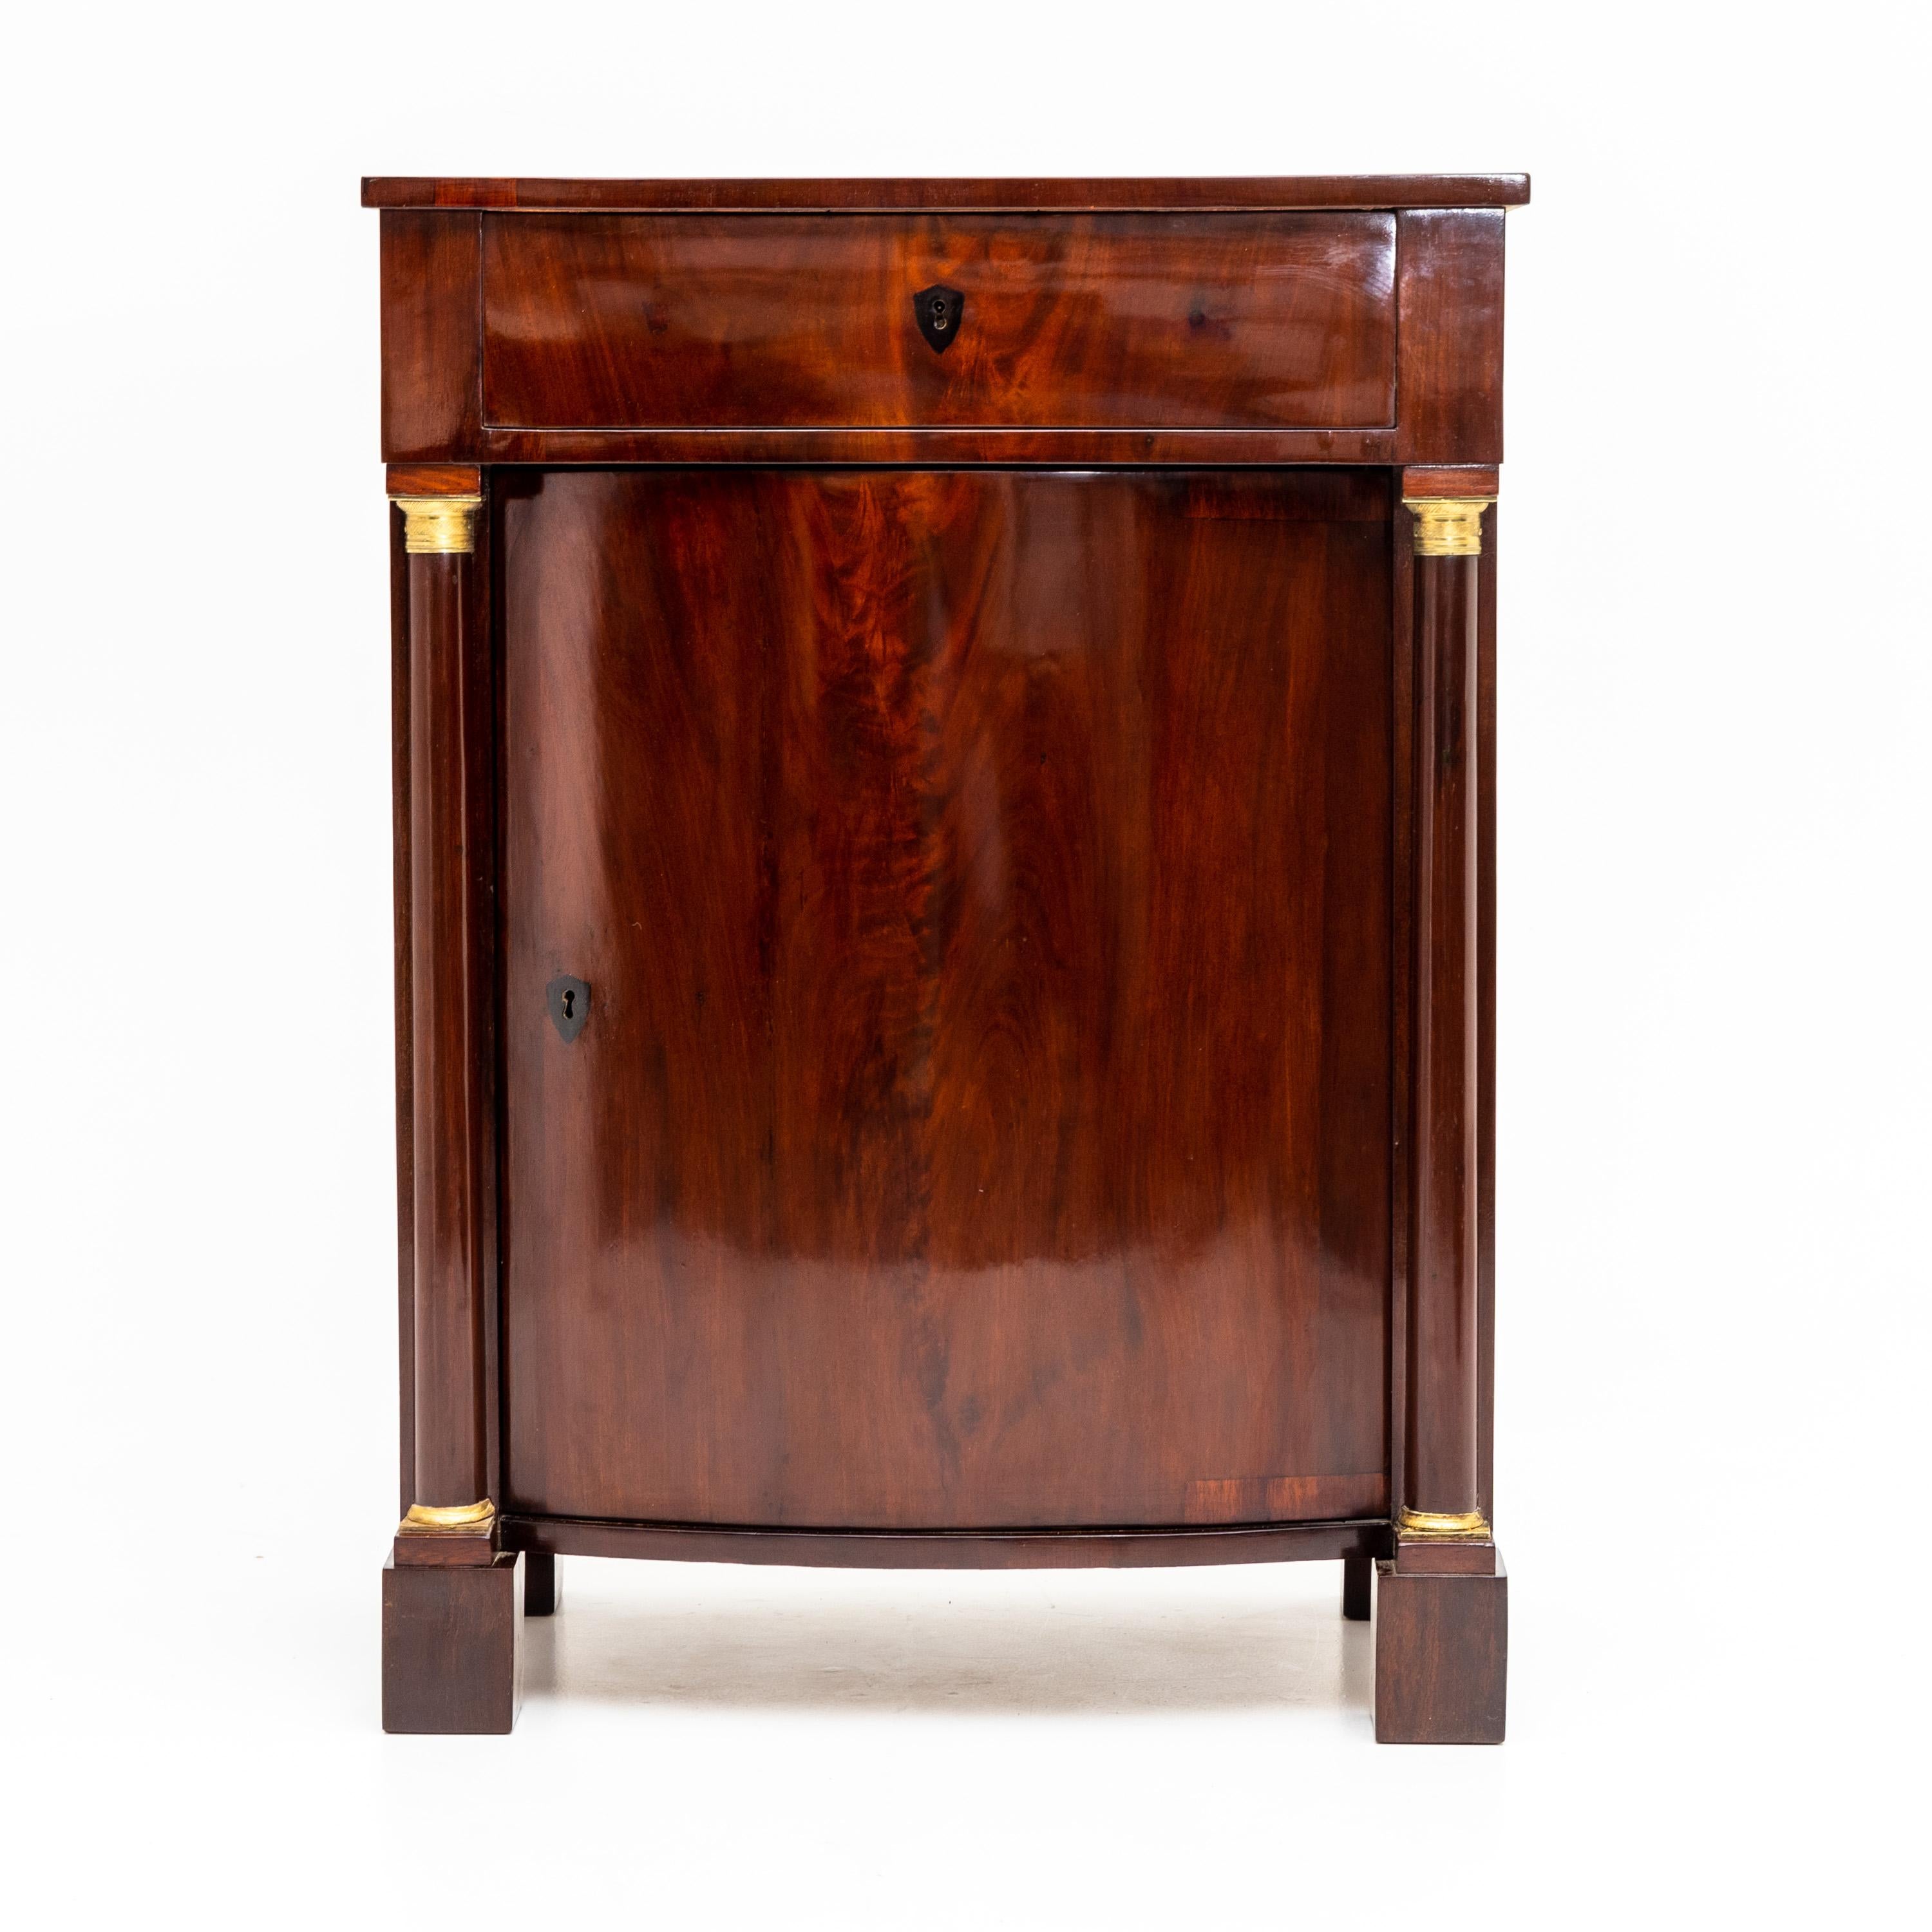 Pillar cabinet with cambered body, one drawer and door, and pillar supports with brass bases and capitals. Mahogany veneered.